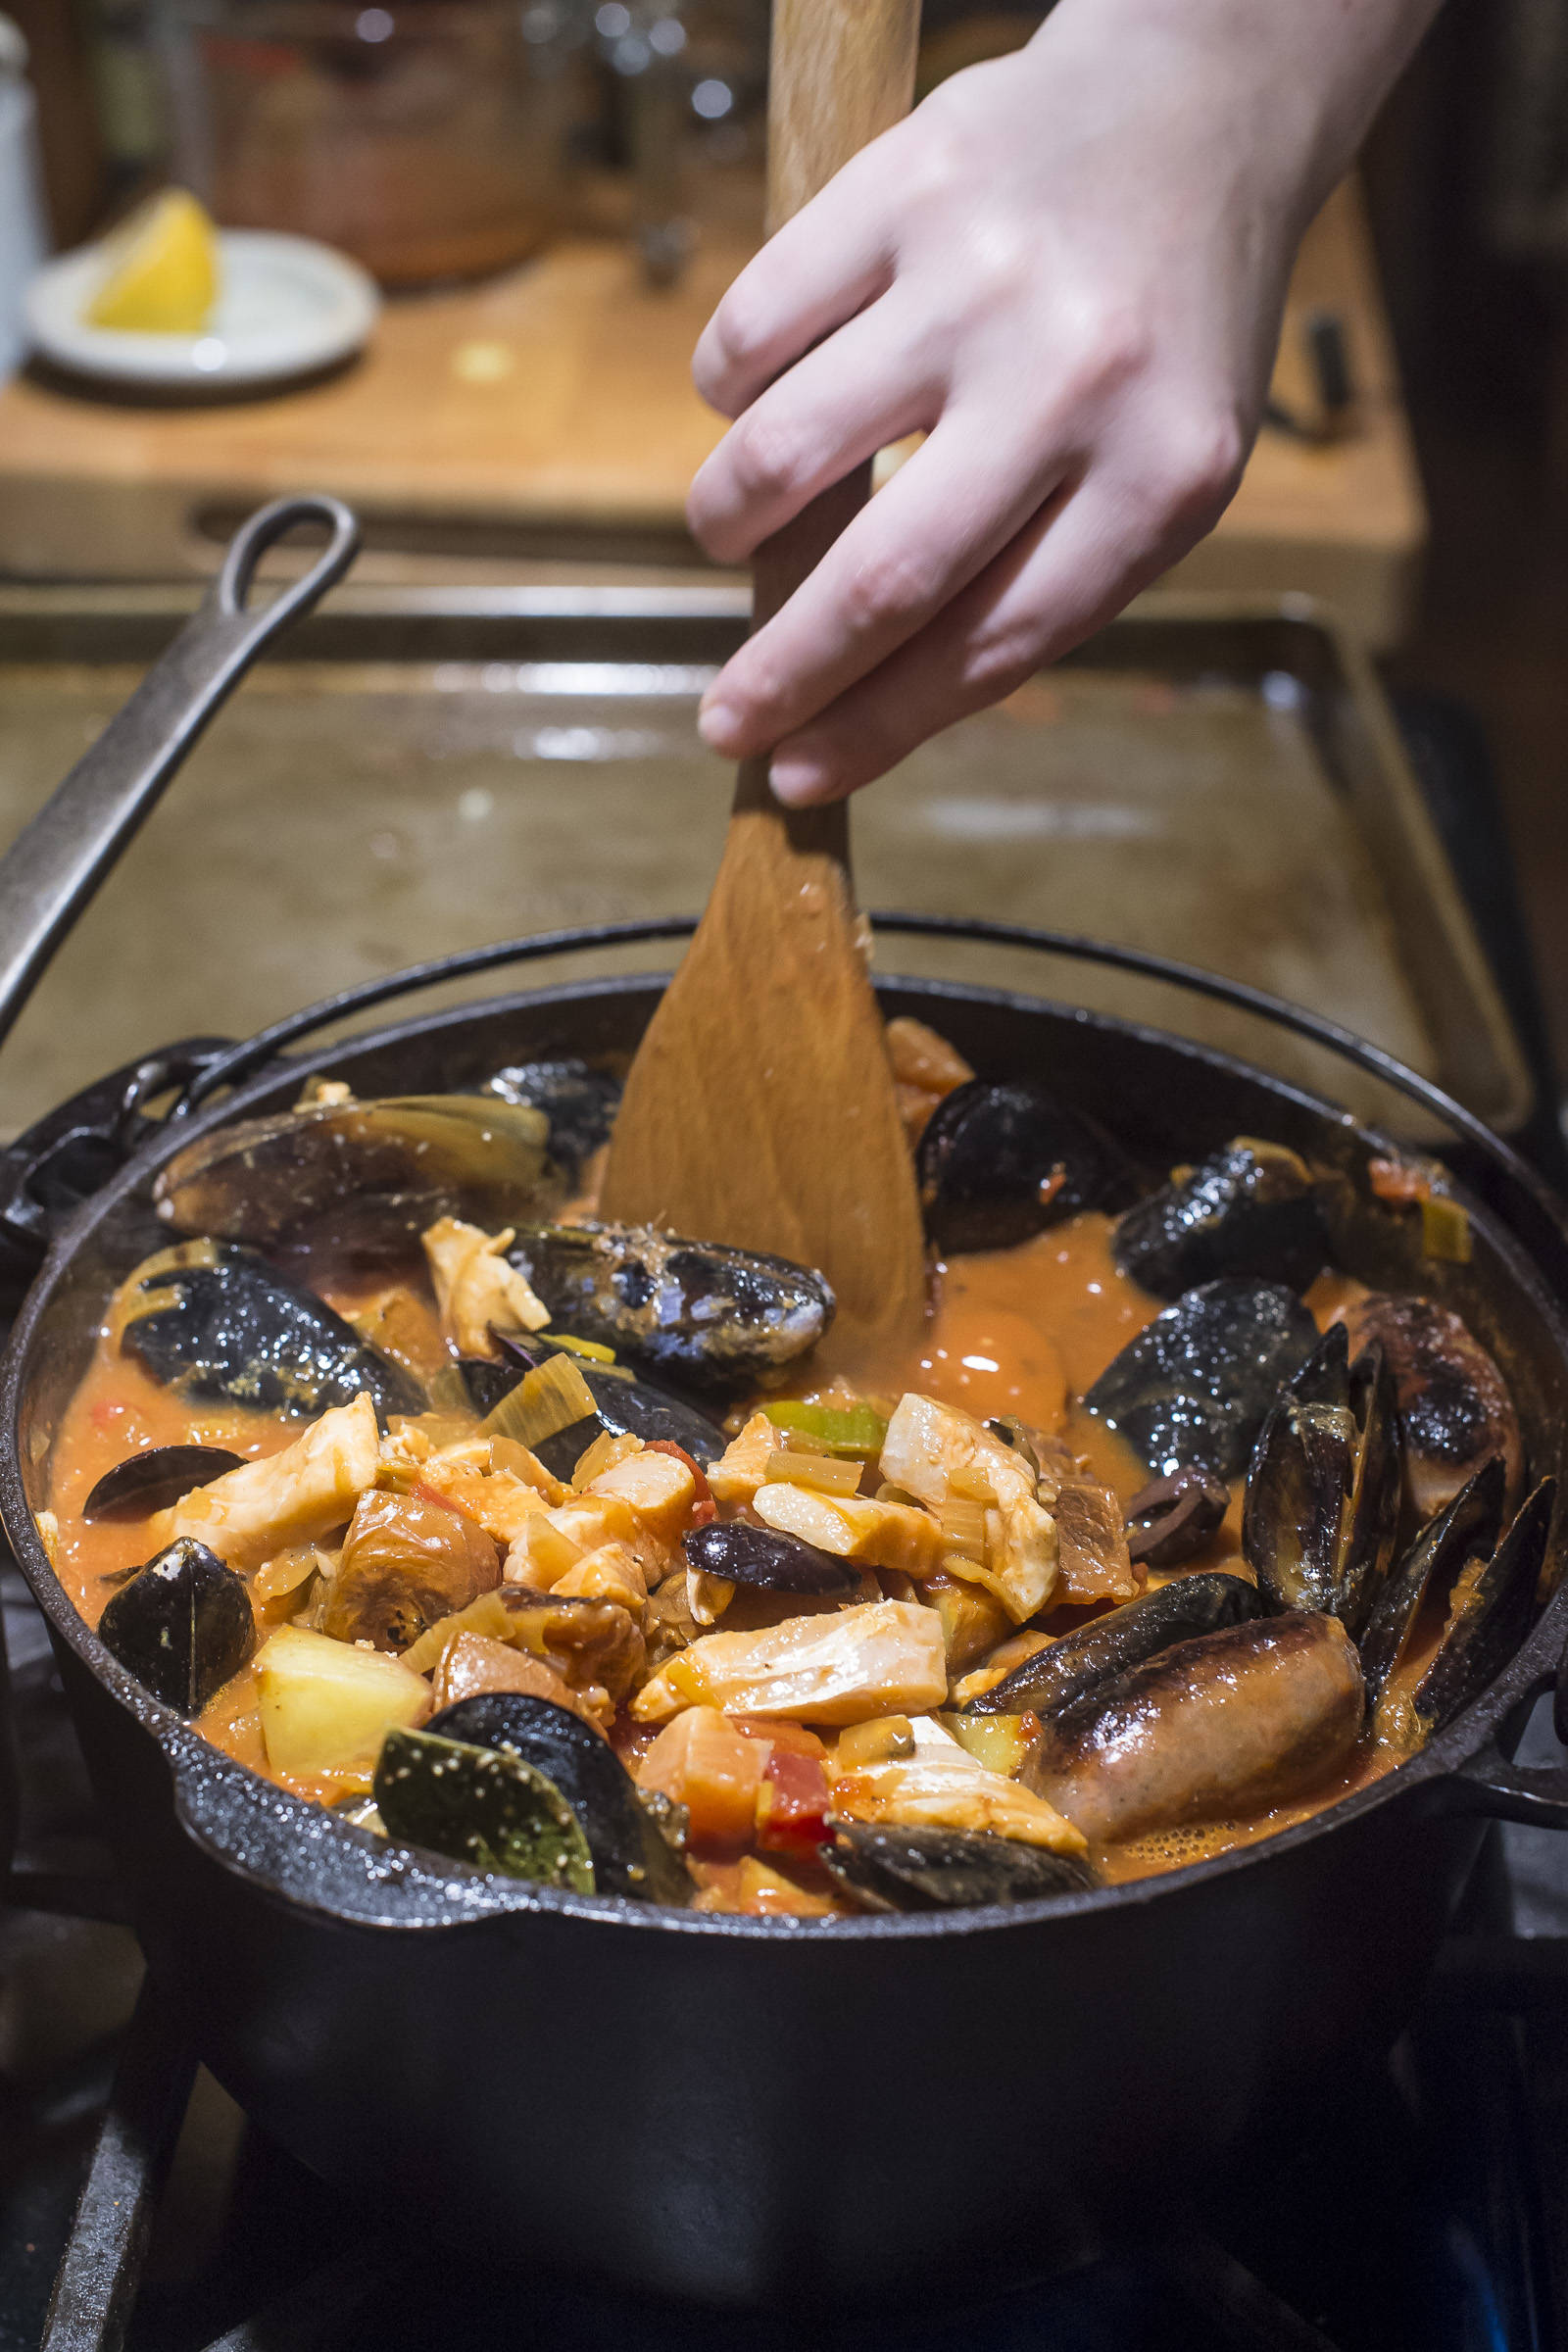 Erin Anais Heist prepares her tomato-based Portuguese fisherman’s stew with a variety of seafood, spicy sausage, potatoes and smoked paprika in her home kitchen on Friday, Dec. 14, 2018. (Michael Penn | Juneau Empire)